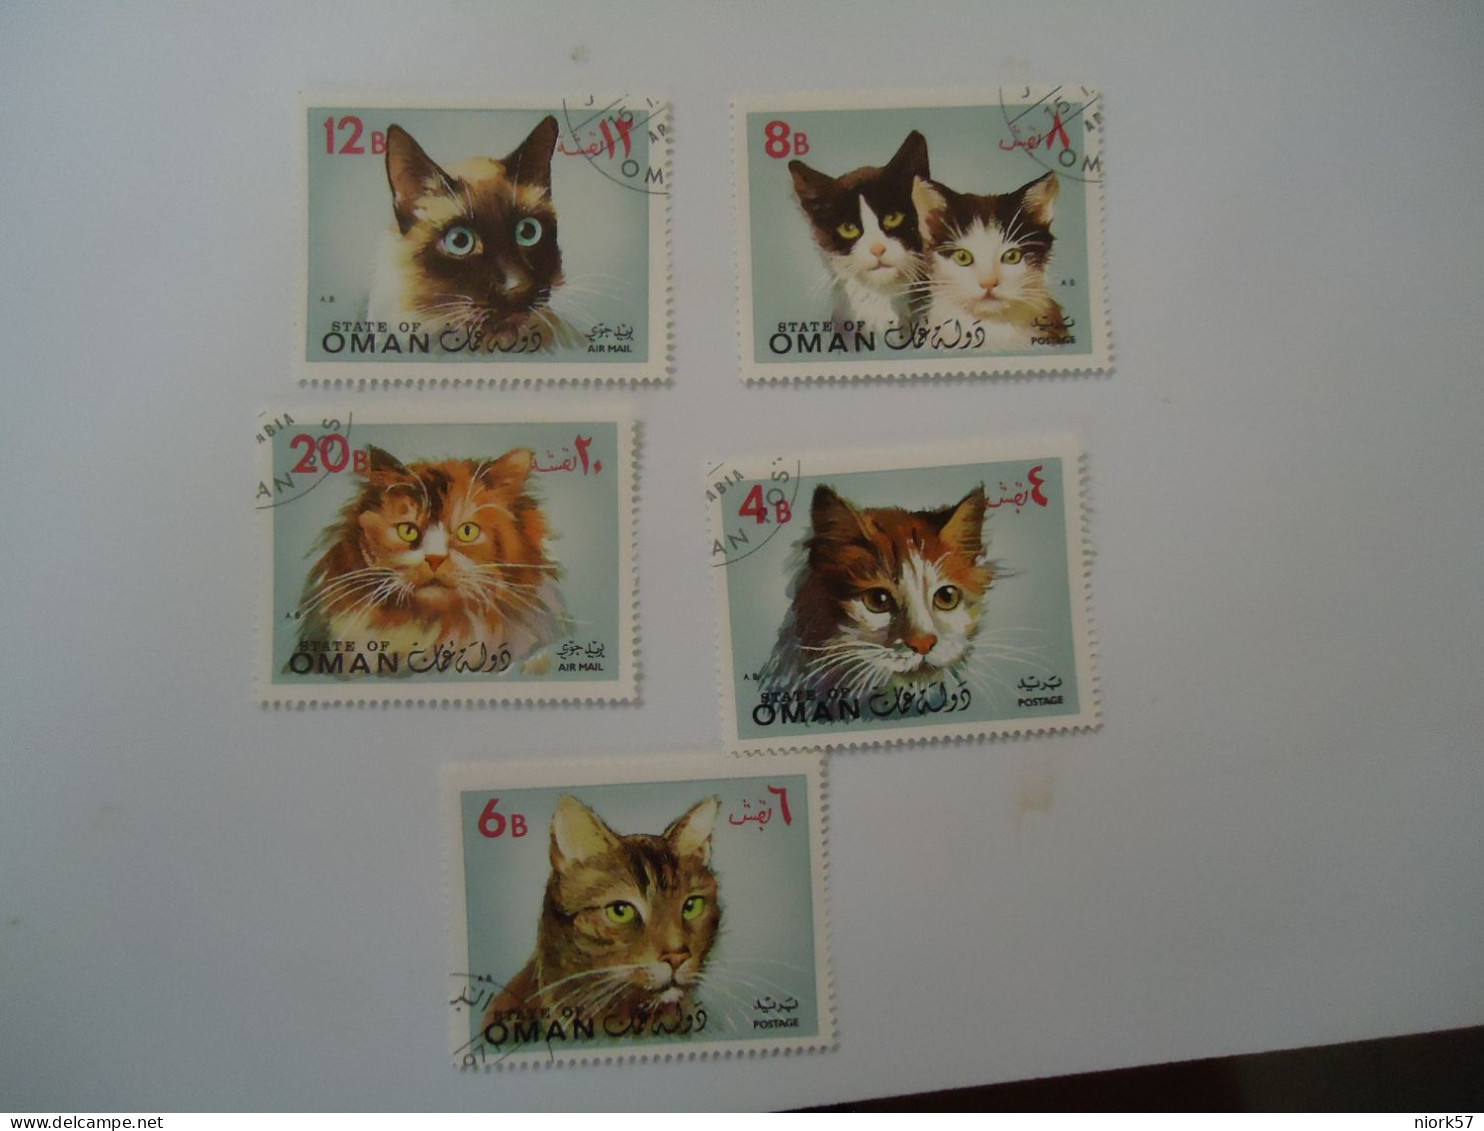 OMAN STATE  USED    SET 5 CATS - Domestic Cats